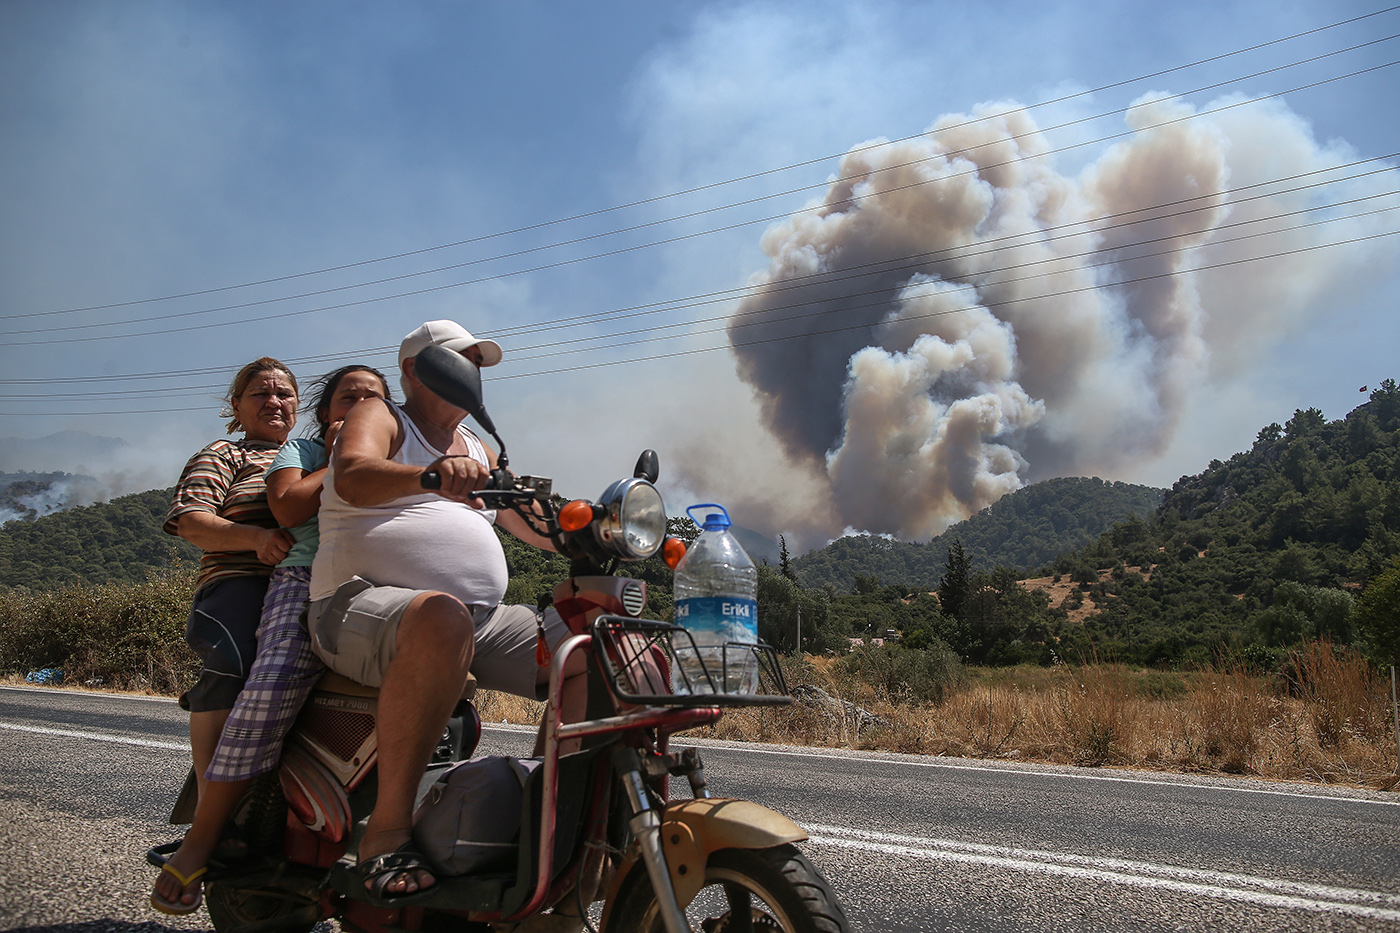 Poeple pass by motorcycle in front of a wildfires at the rural of Marmaris district of Mugla, Turkey, 01 August 2021. Turkish Health minister Fahrettin Koca confirmed that 6 people have lost their lives due to the wildfires raging in Turkey’s Mediterranean towns.